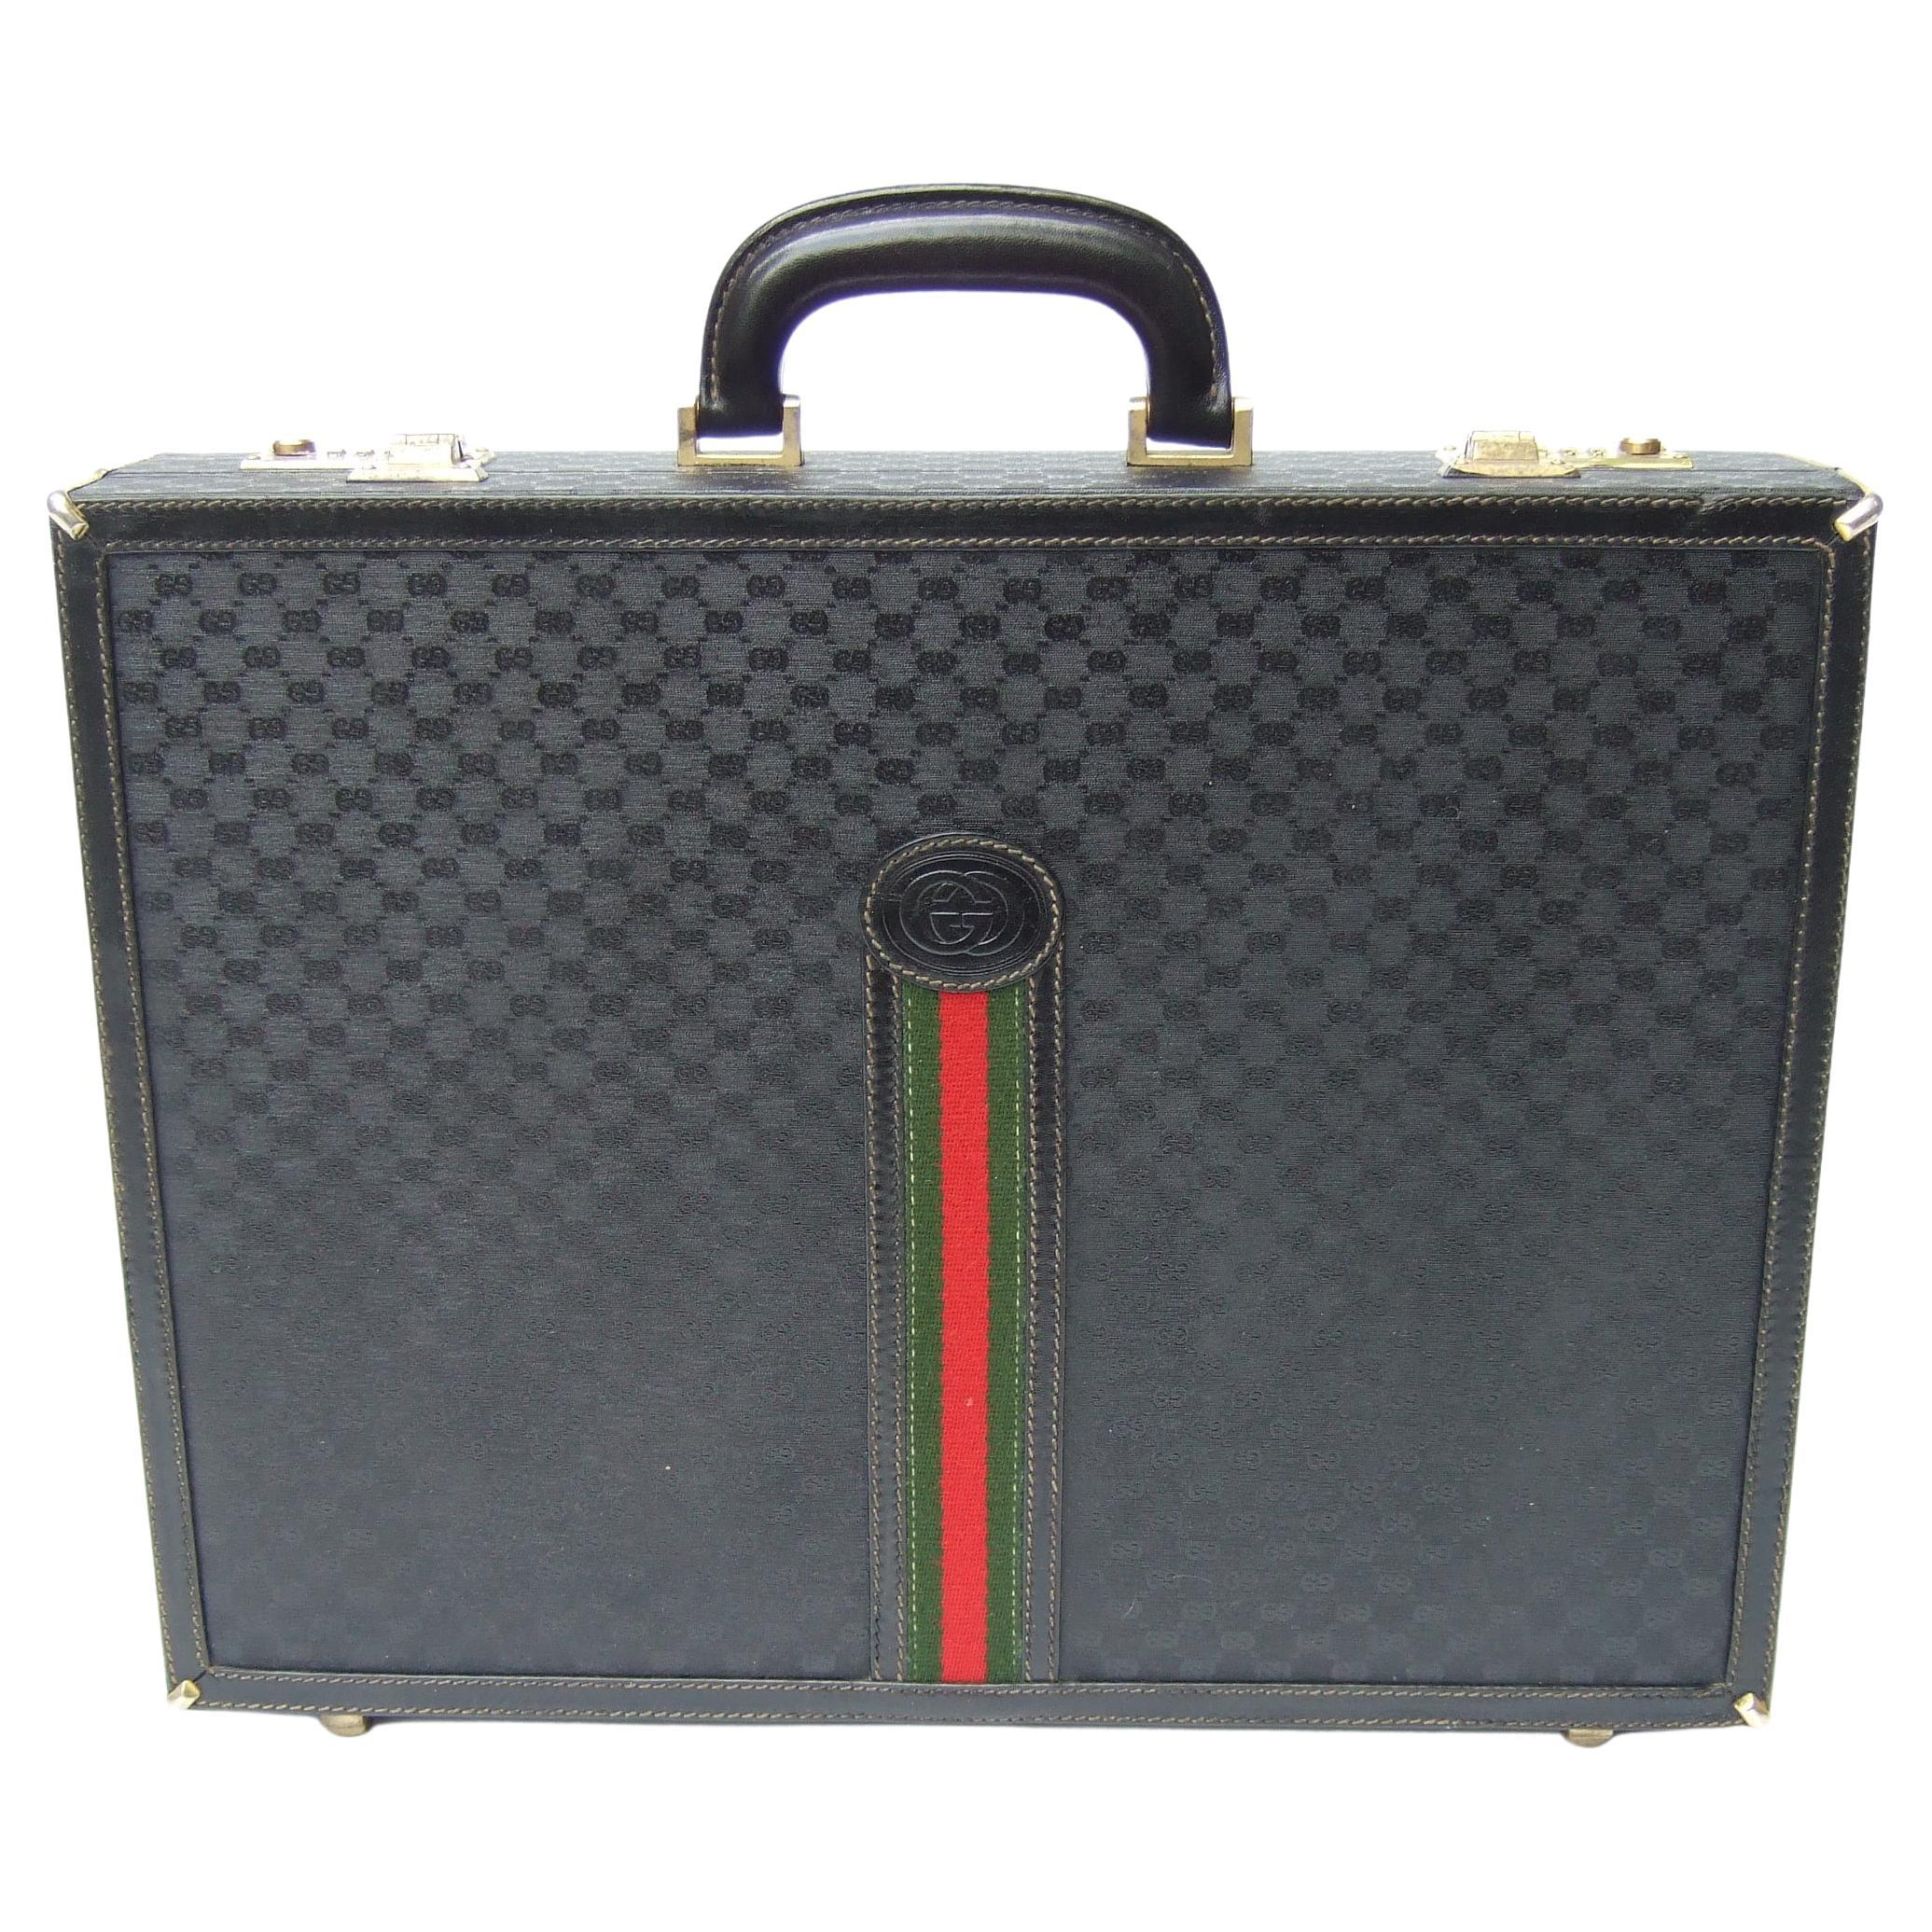 Gucci Italy Rare black coated canvas unisex briefcase c 1970s
The stylish Italian briefcase is designed with Gucci's signature
red & green canvas webbed stripe that runs down the front exterior

Covered with Gucci's coated canvas with their subtle